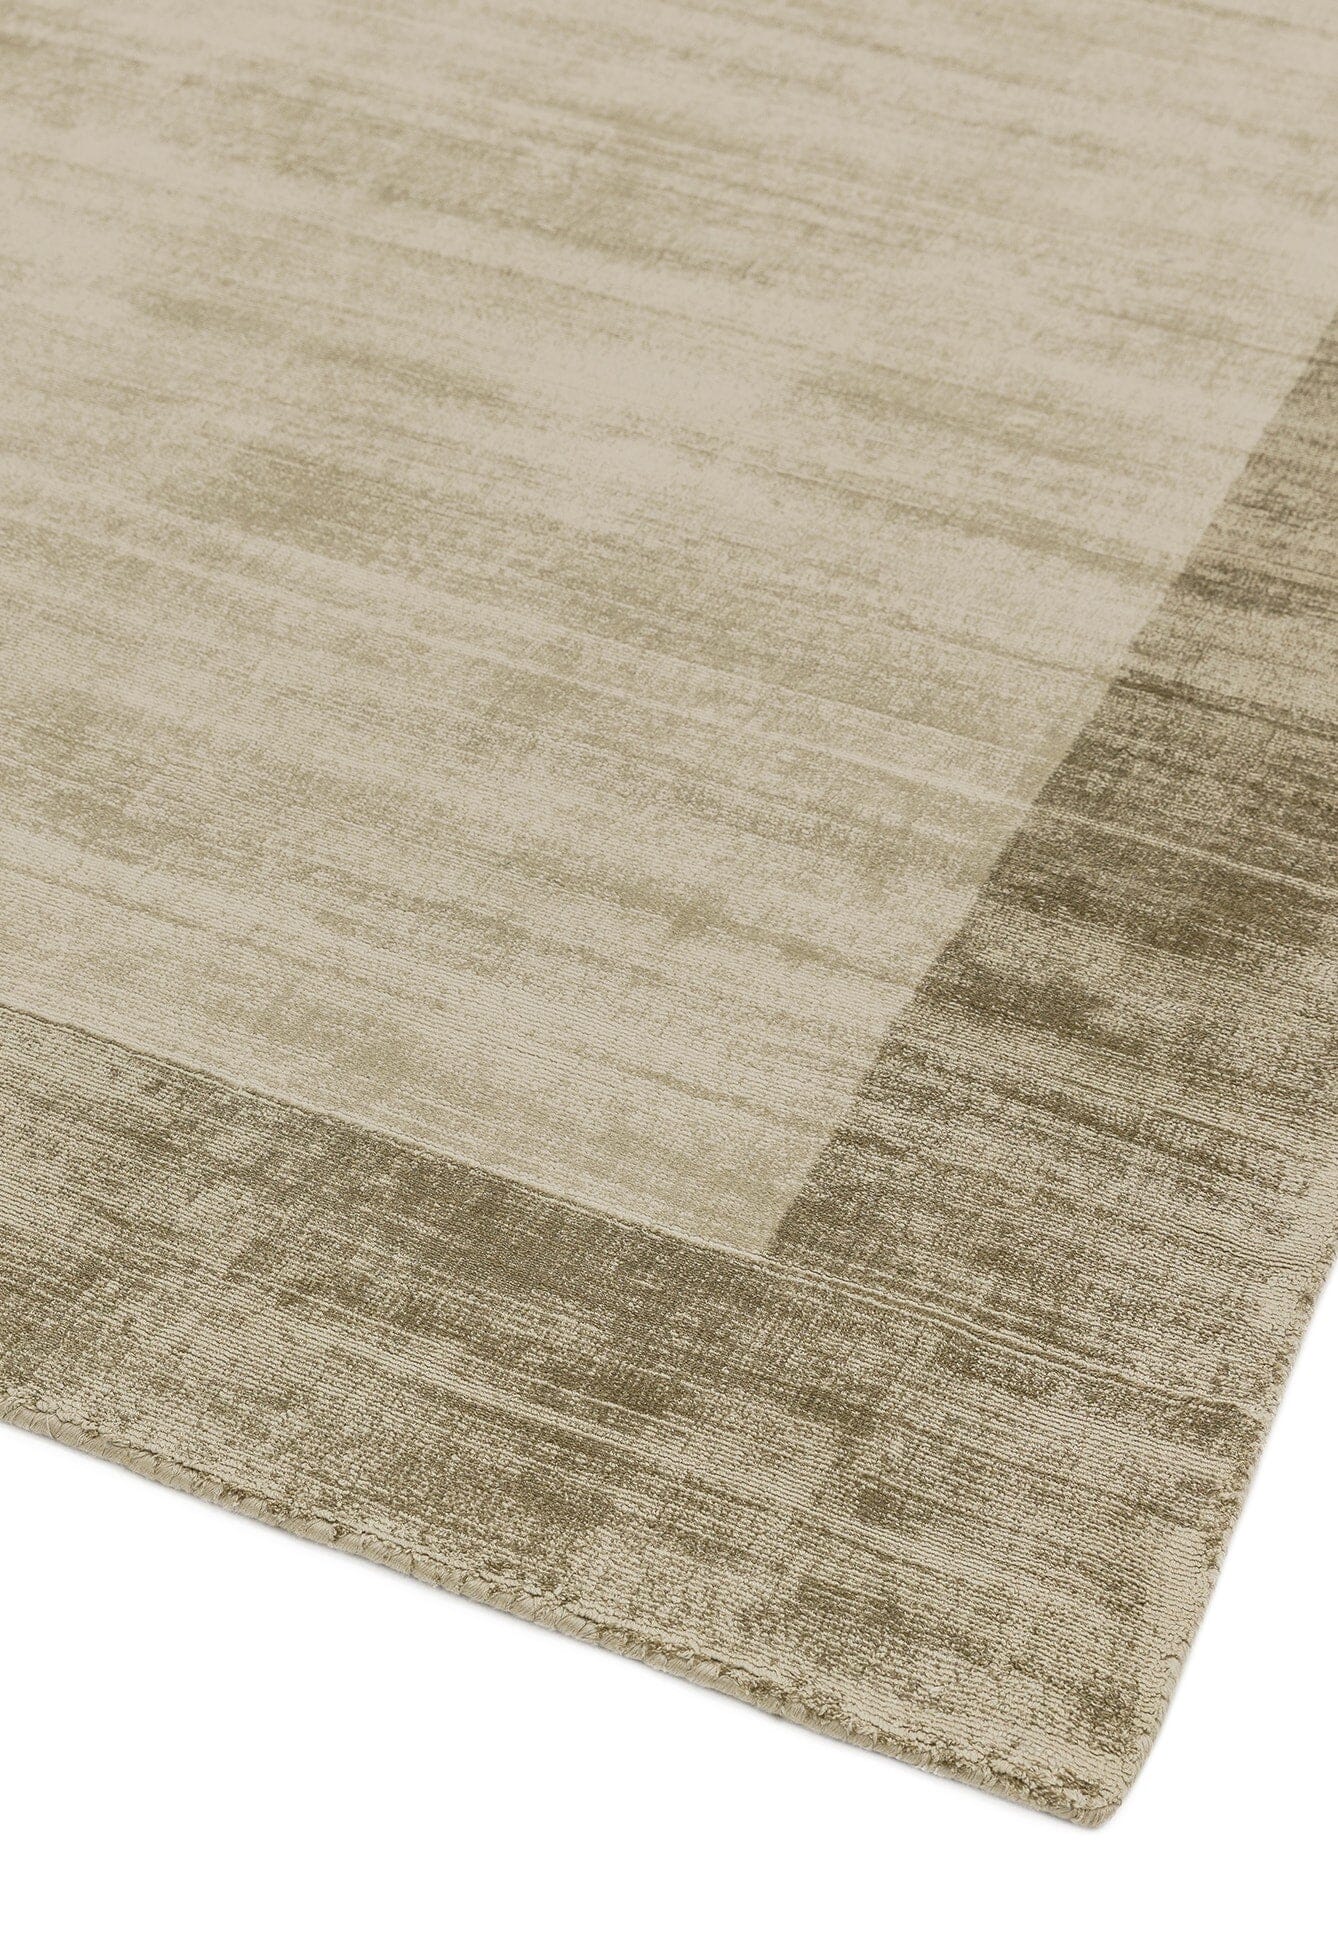 Asiatic Carpets Blade Hand Woven Rug Smoke Putty - 200 x 200cm